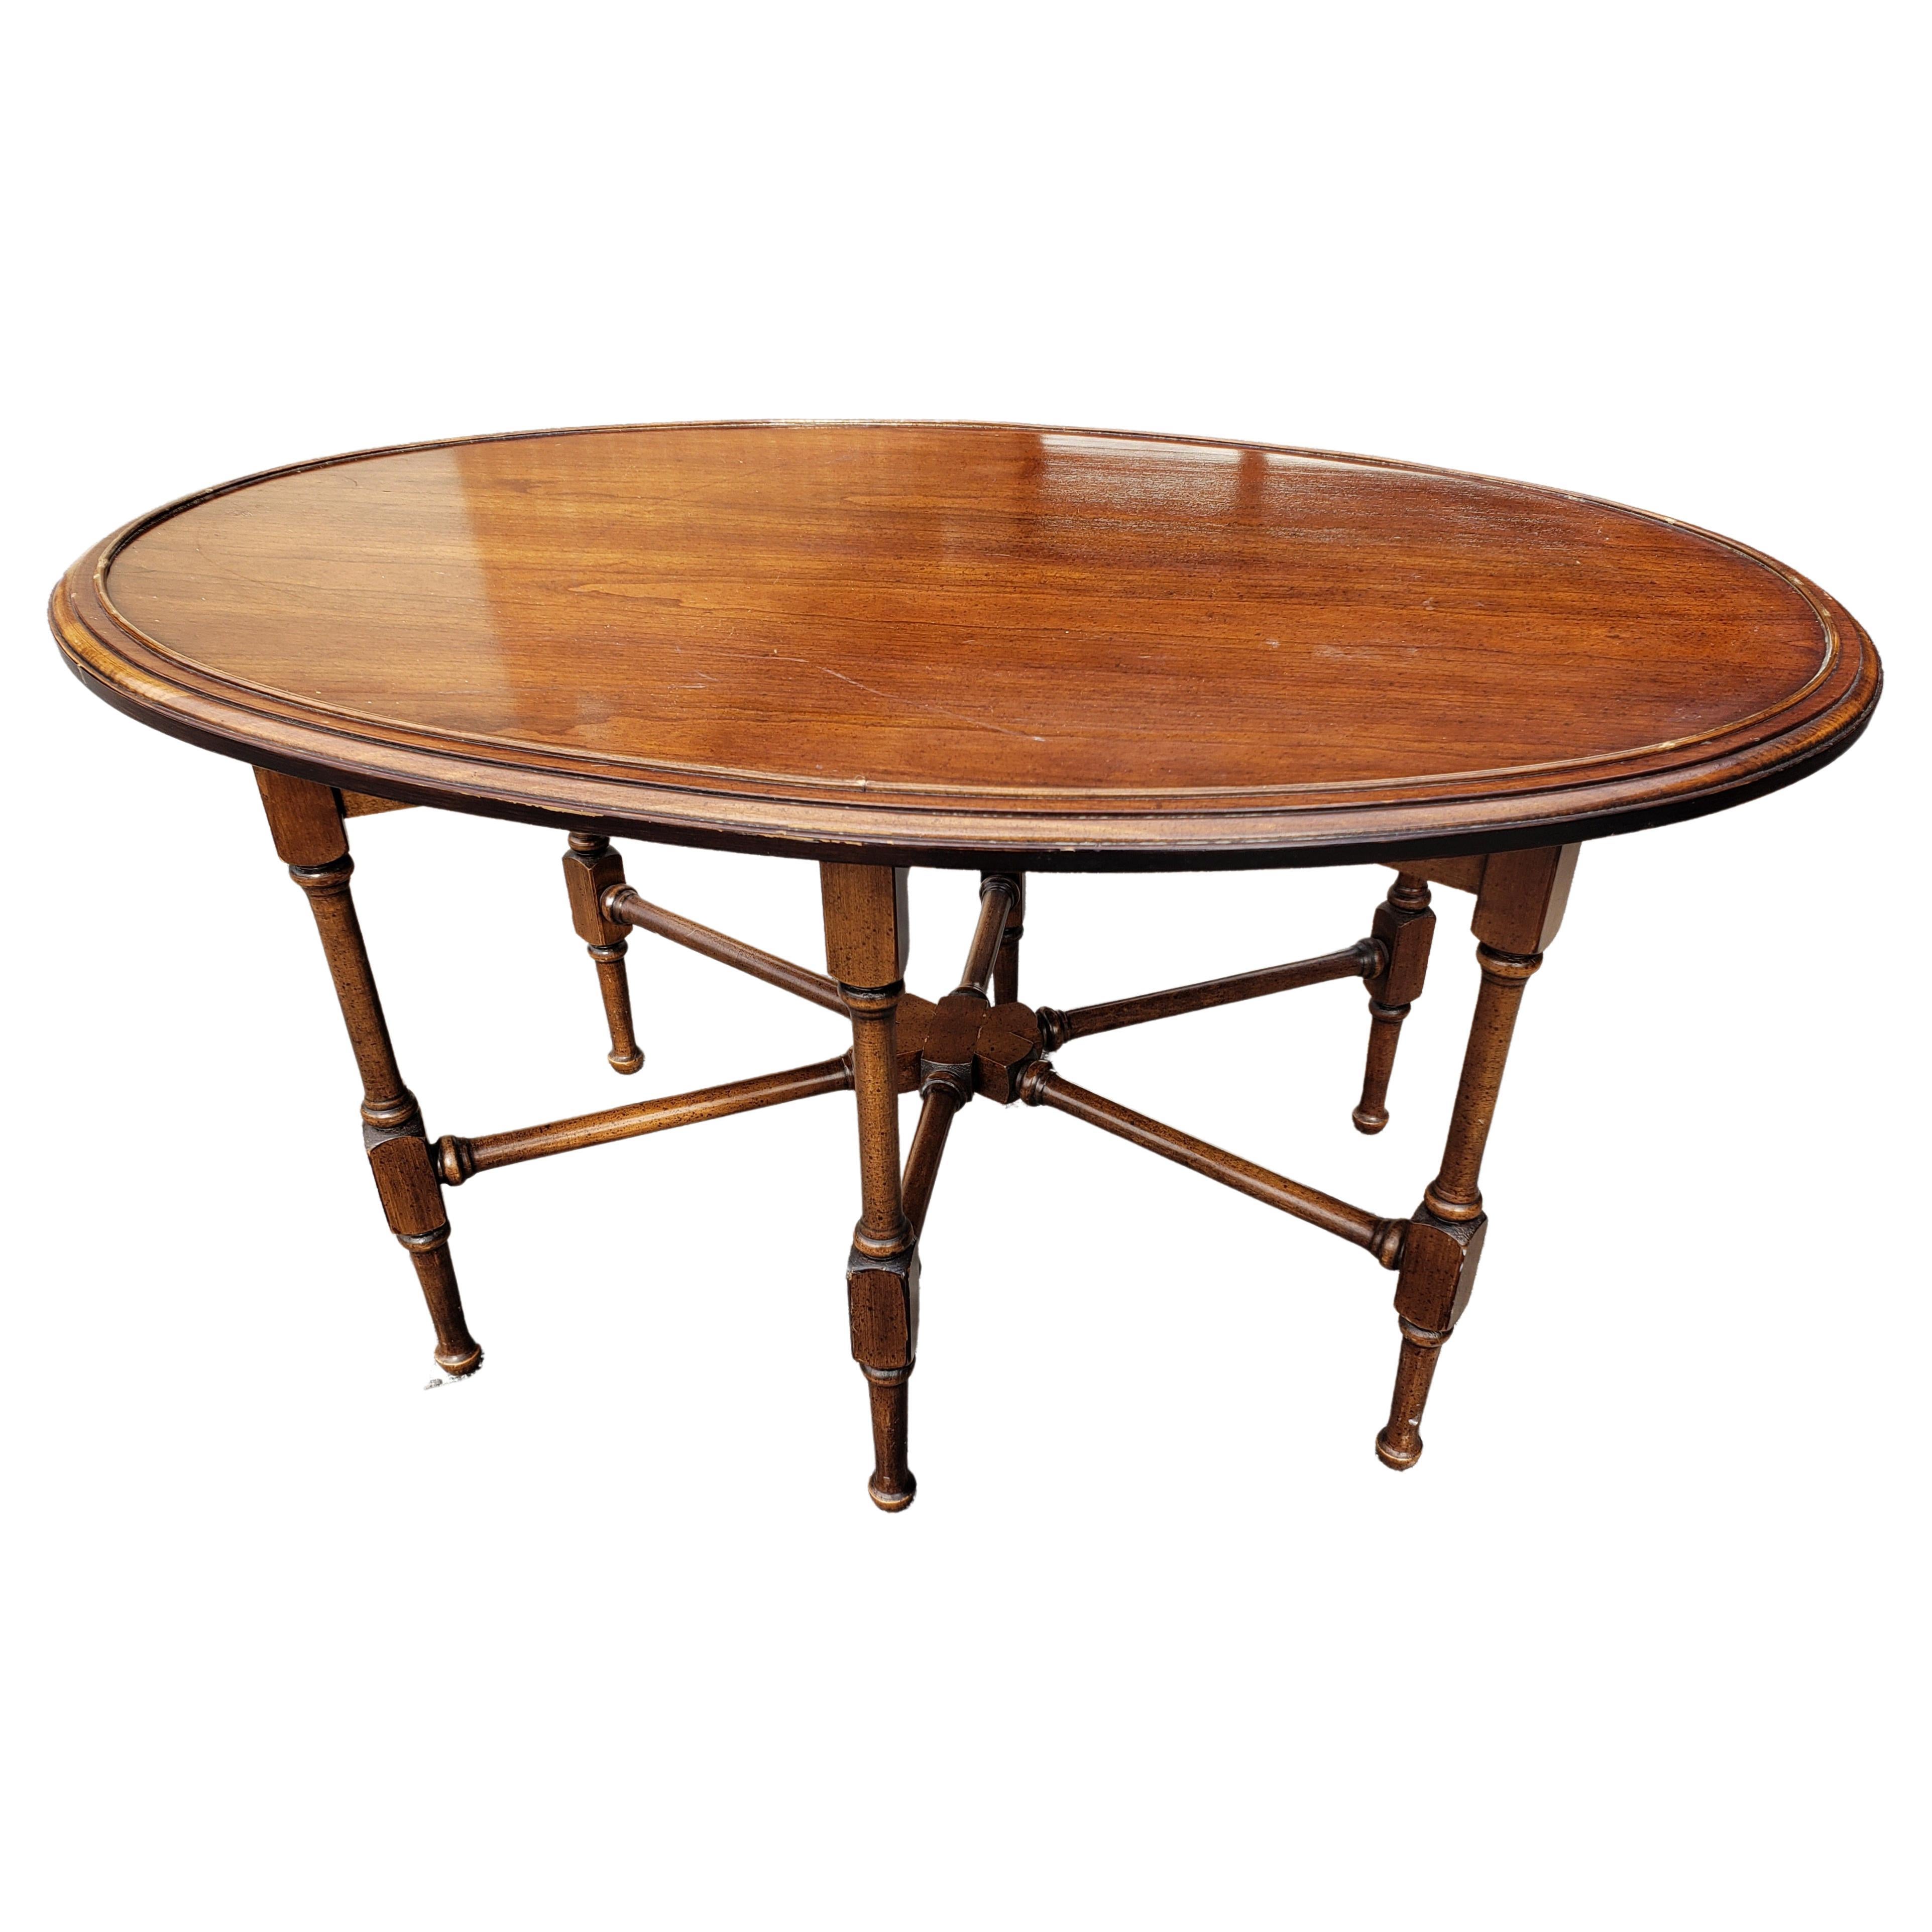 Brandt furniture faux bamboo mahogany oval coffee table, Circa 1960s. 6 legs joined together underneath the table provides uniqueness and greater stability for this table
 Measures 35